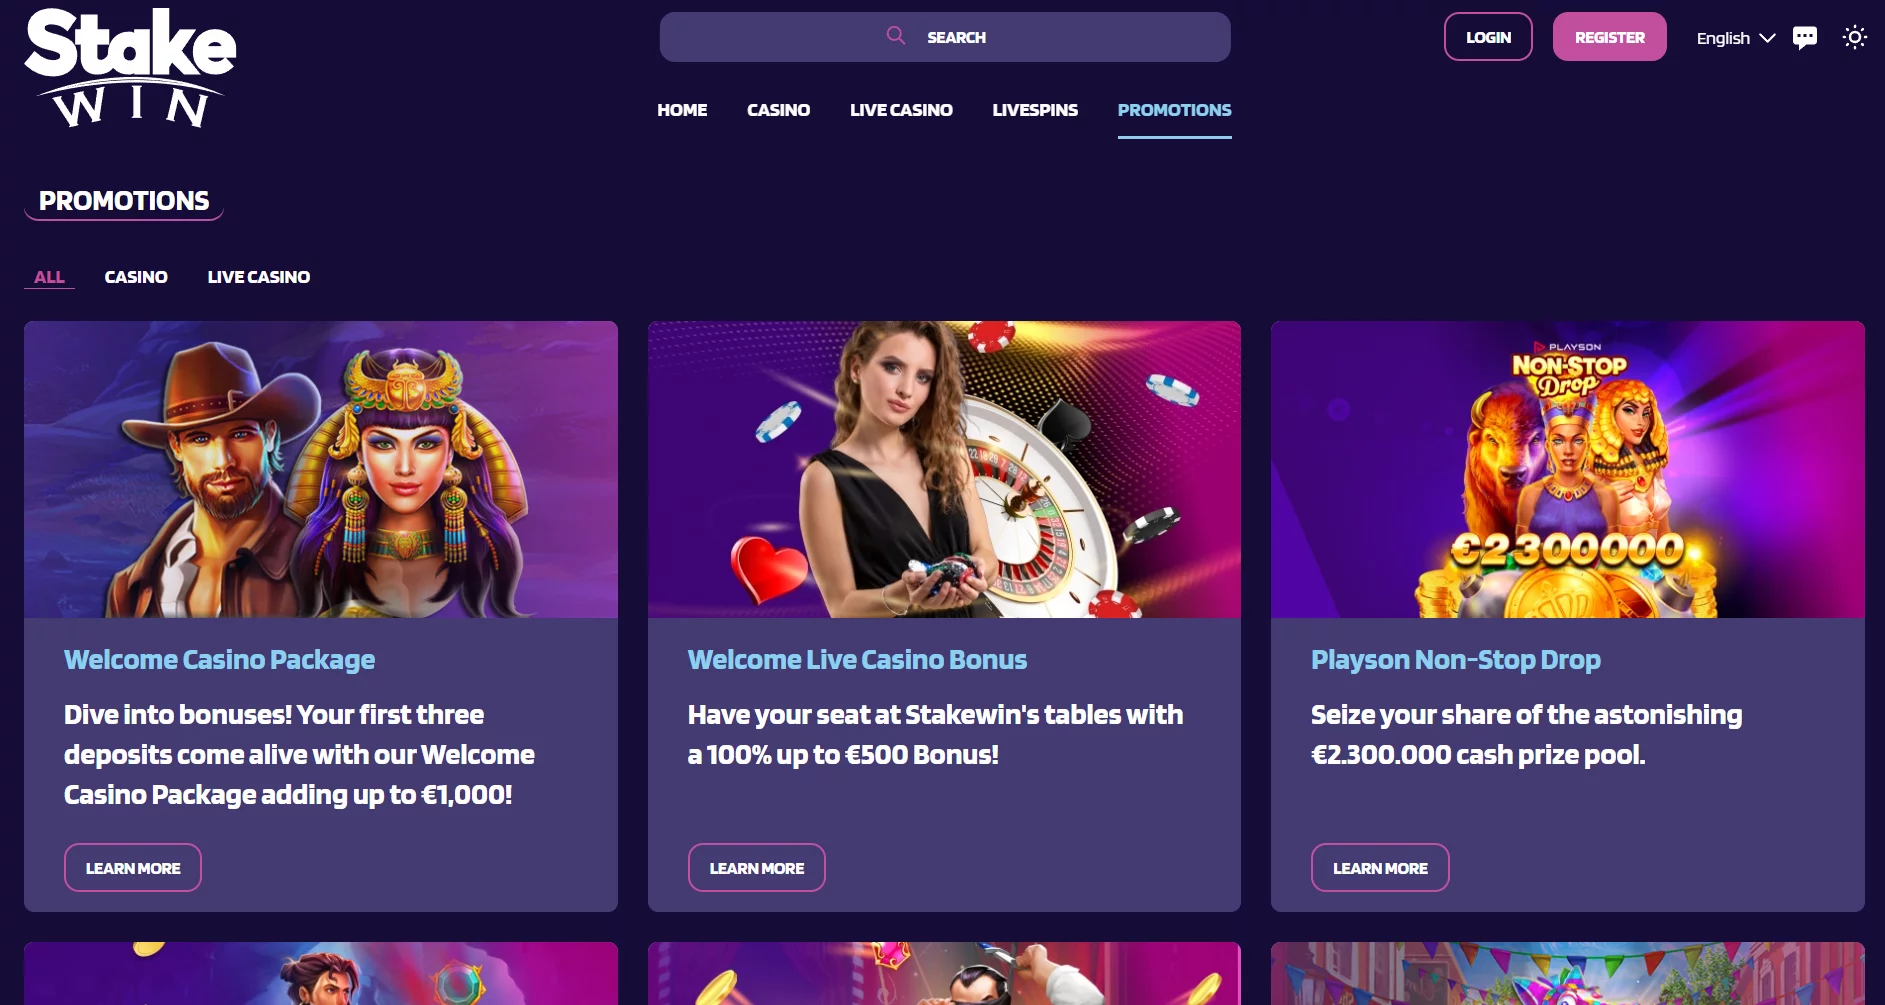 StakeWin Casino Promotions